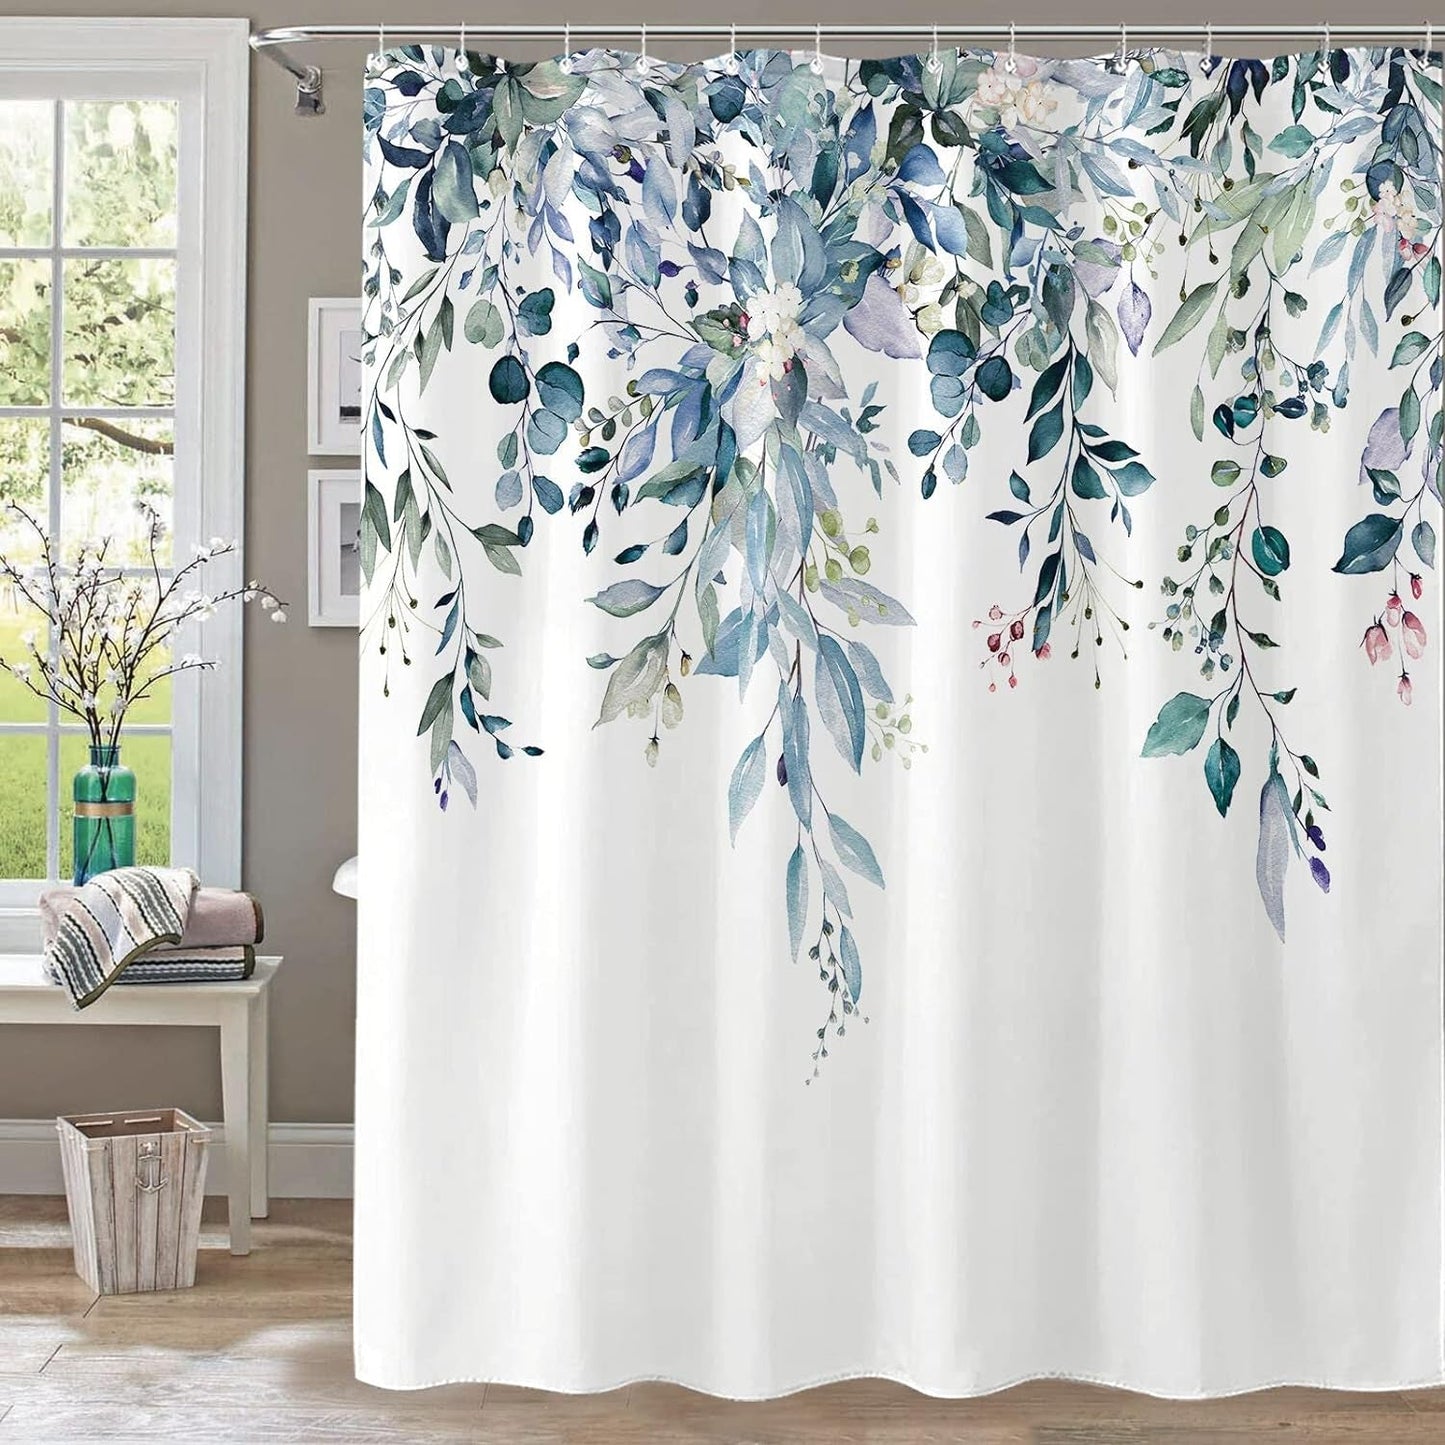 Eucalyptus Plant Rustic Shower Curtain, Watercolor Leaves on the Top Country Farm House Shower Curtain, Spring Botanical Bathroom Curtain 72 ×72 Inch